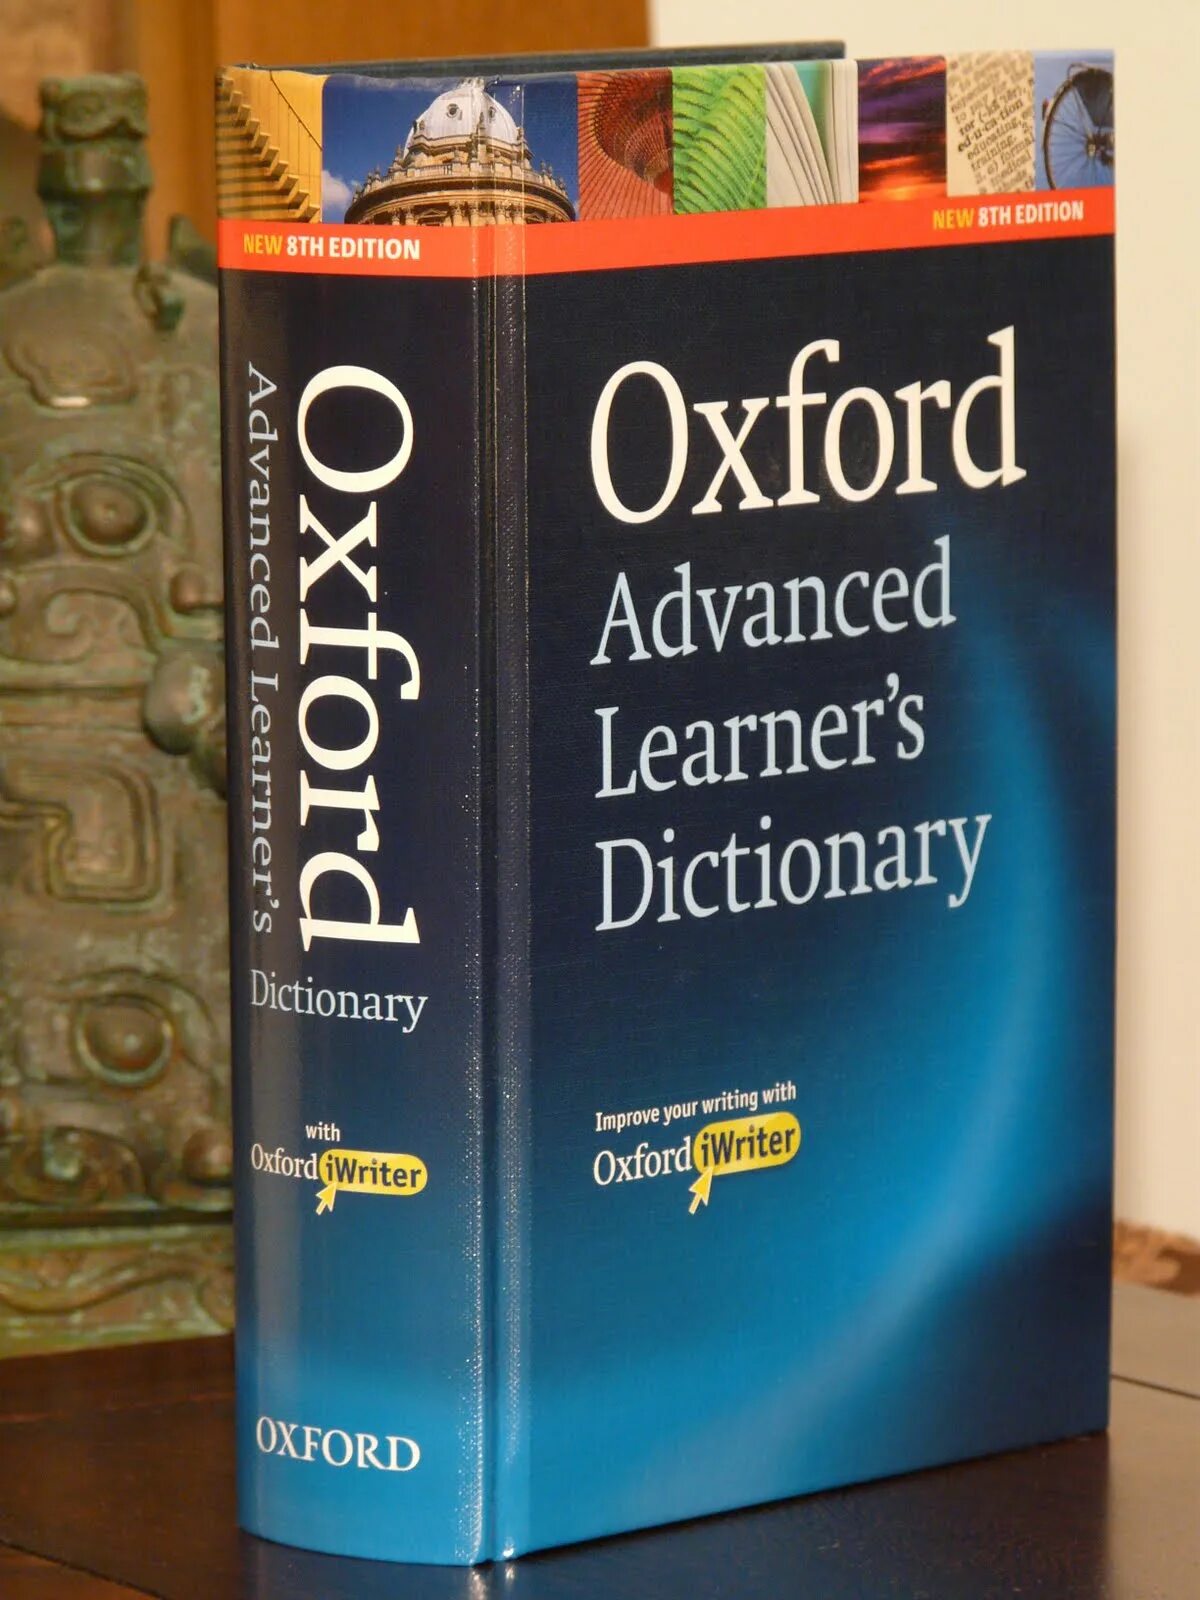 Advanced learner s dictionary. Oxford Advanced Learner's Dictionary книга. Oxford Advanced Learner's Dictionary oald 9th Edition. Oxford Advanced Learner's Dictionary 10th Edition. Oxford Advanced Learners Dictionary oald 10th Edition.